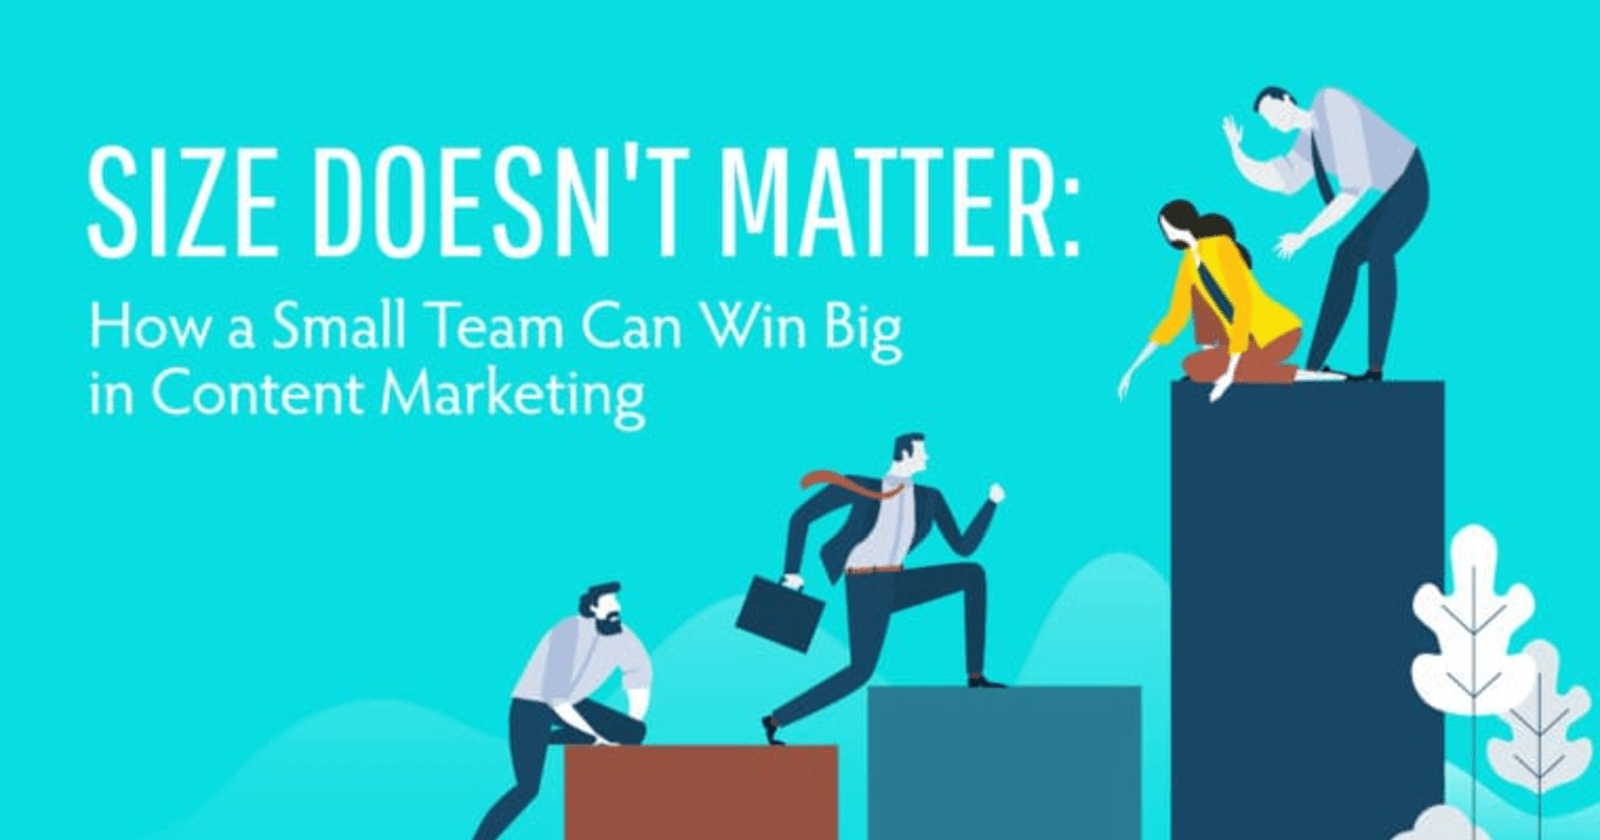 Size Doesn't Matter: How a Small Team Can Win Big in Content Marketing